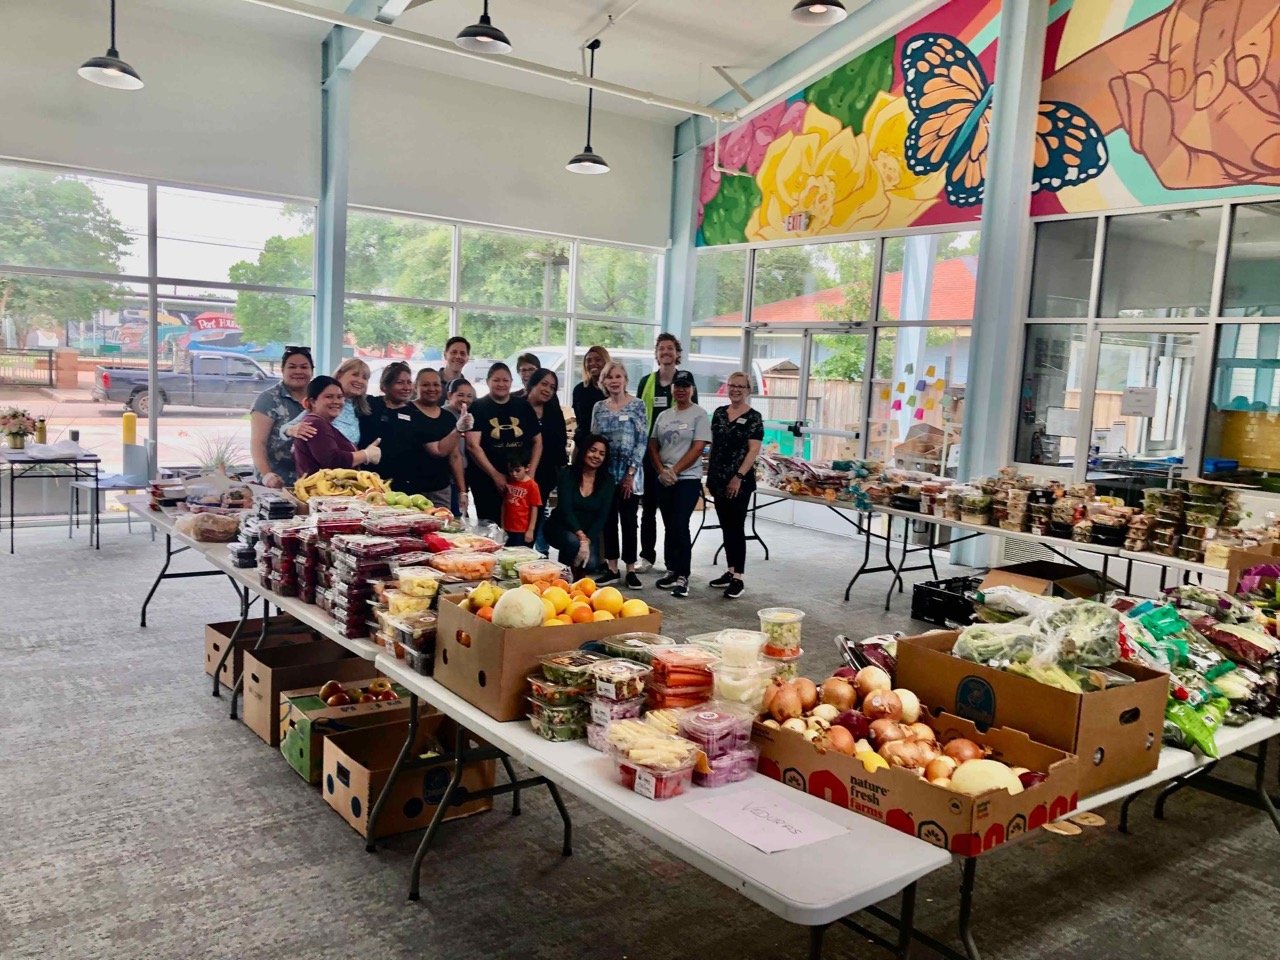 Flashback to our first PopUp Grocery Store at the Neighbors in Action Community Center! 🛒✨ We provided 48 Port Houston families with a free shopping experience, offering fresh produce, milk, eggs, and meat. It's moments like these that remind us of 